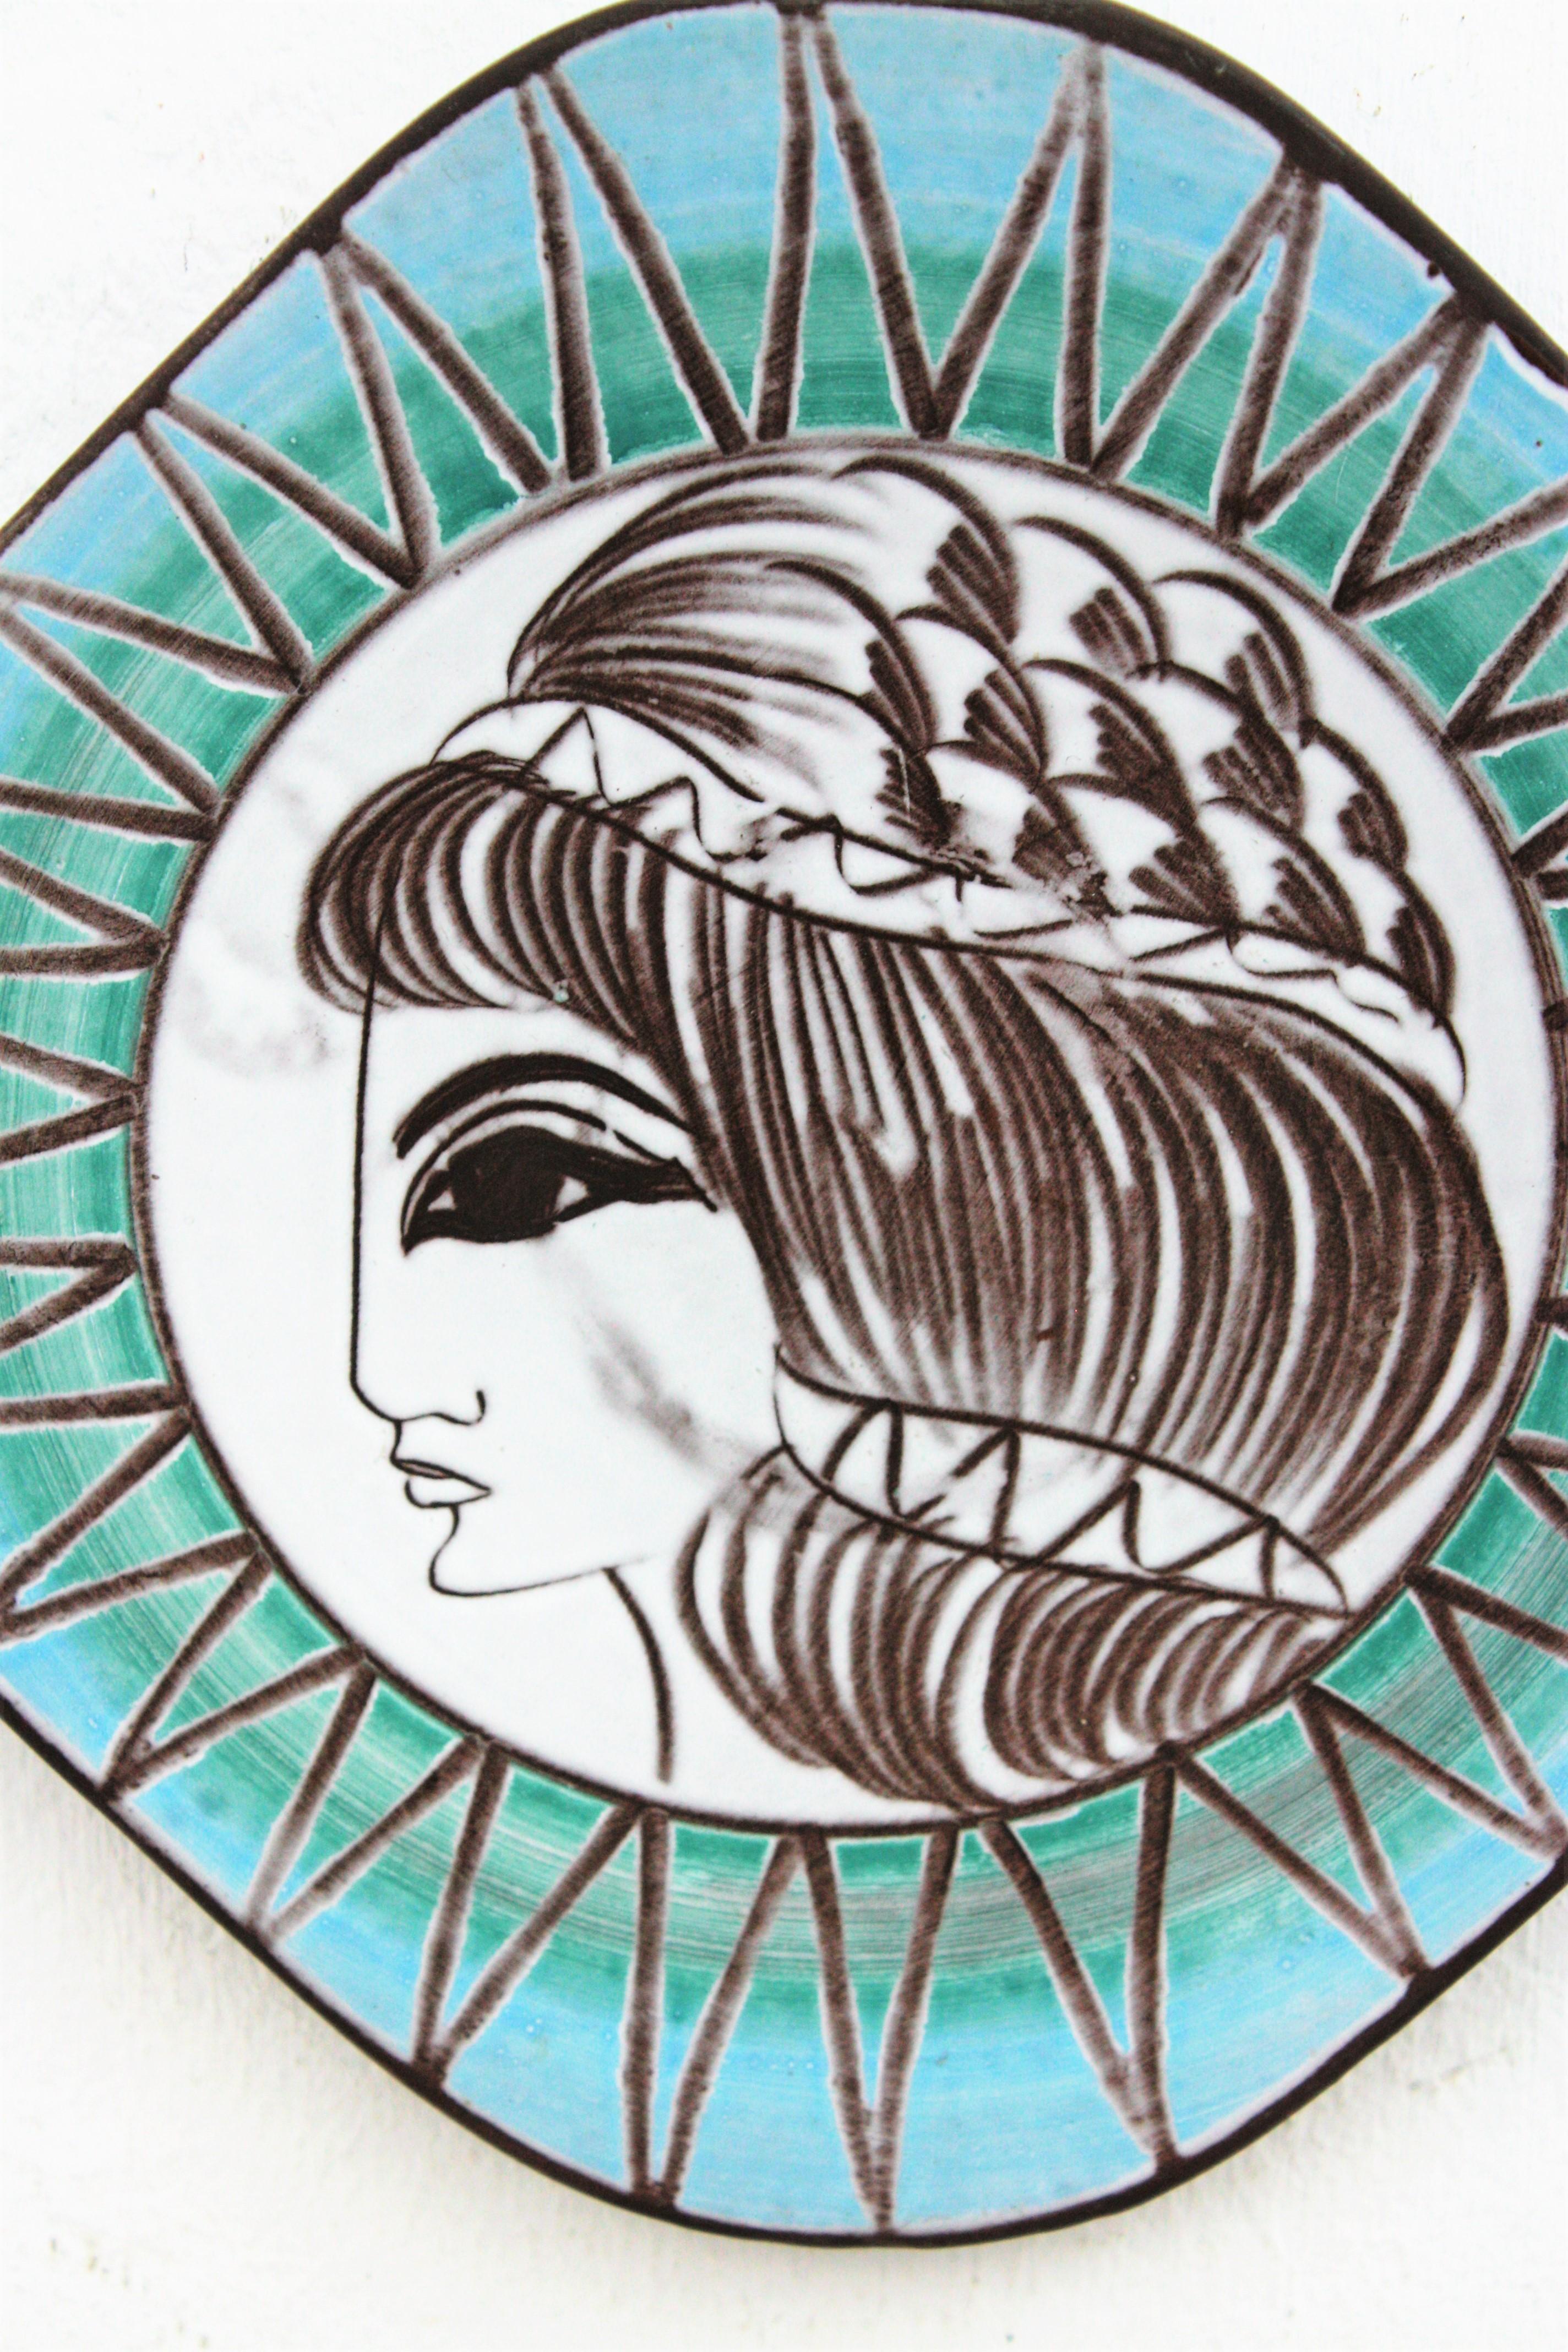 Mid-Century Modern West German Greek Goddess Glazed Ceramic Wall Plate
Beautiful West German glazed ceramic decorative plate or vide poche dish featuring a Greek Goddess surrounded by a geometric pattern, Germany, 1950s.
Impressive design and